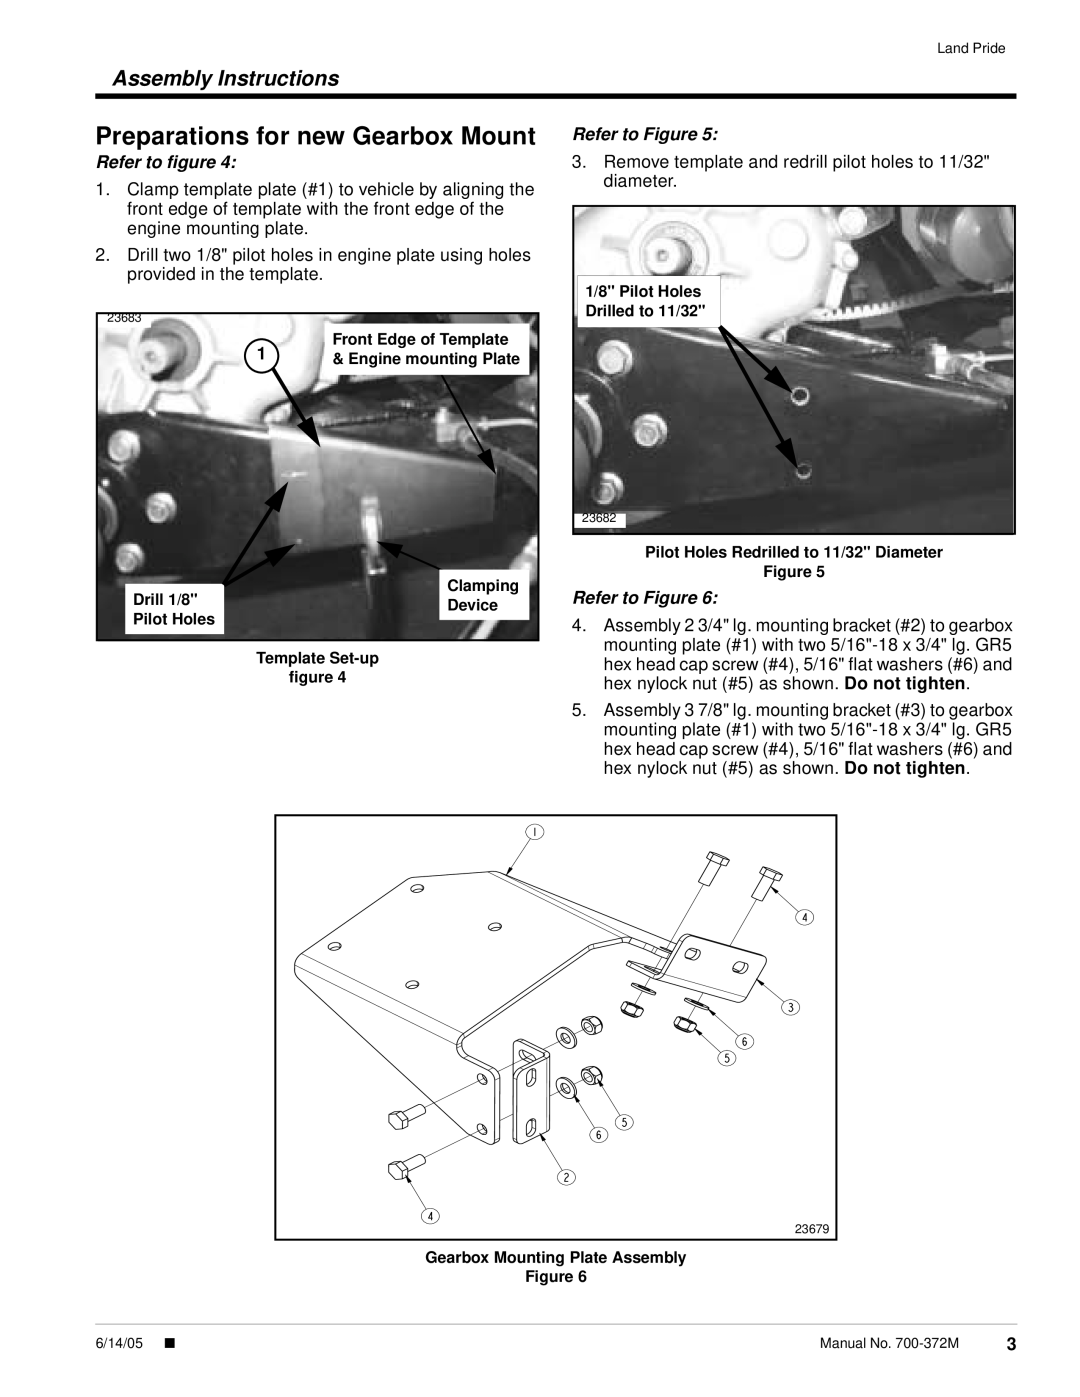 Land Pride 4400NT Preparations for new Gearbox Mount, Refer to ﬁgure, Assembly Instructions, Refer to Figure 